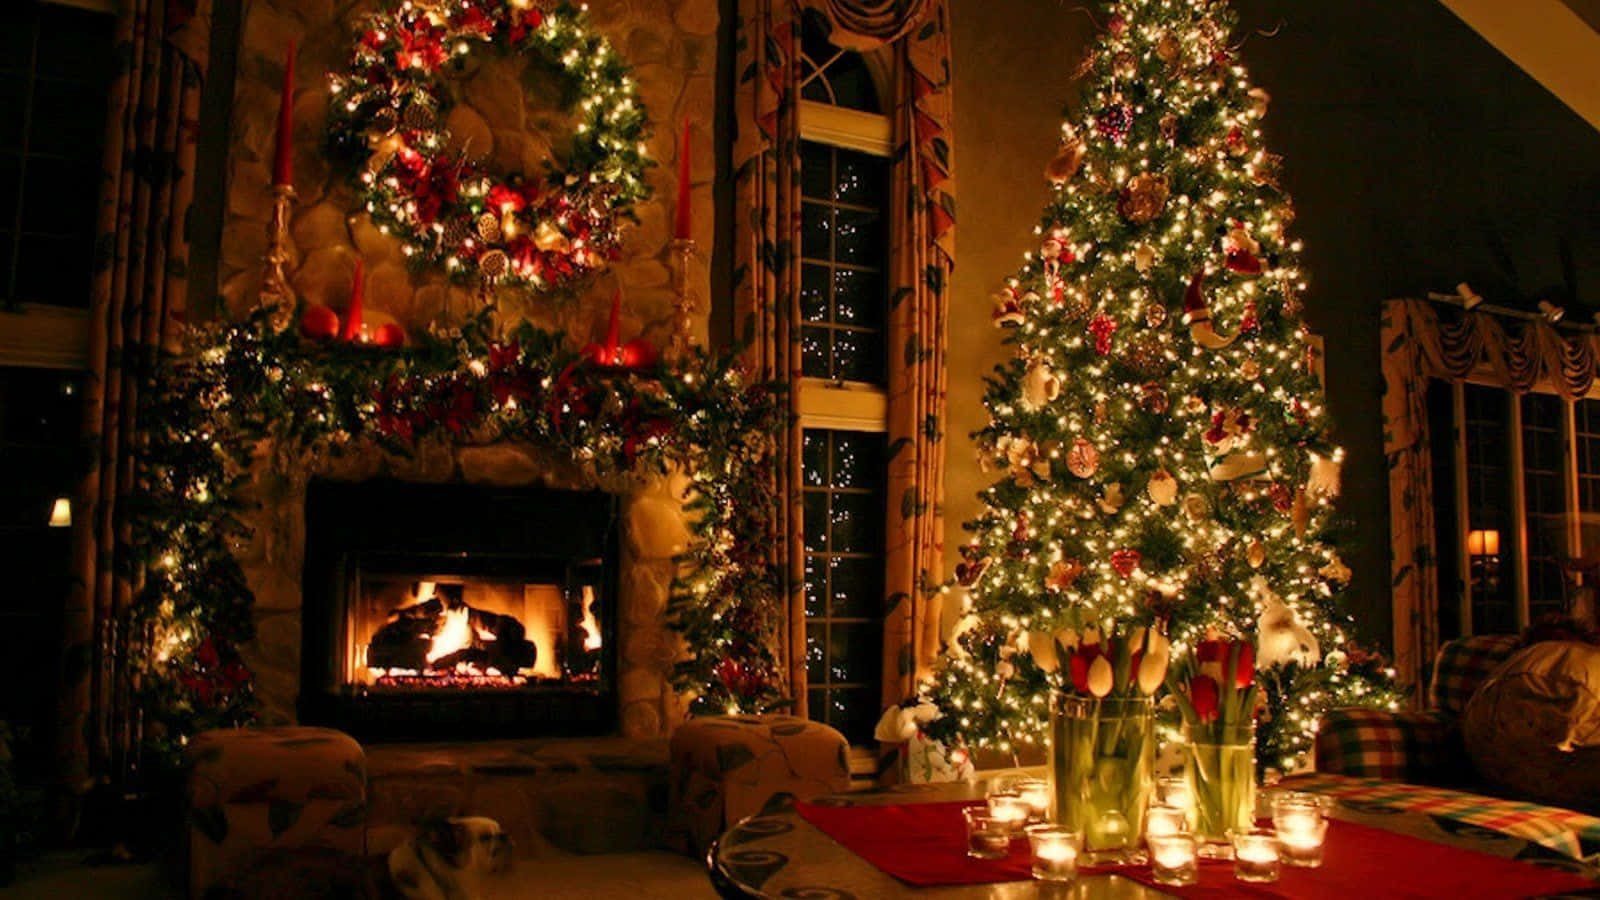 Celebrate a special Christmas with friends Wallpaper